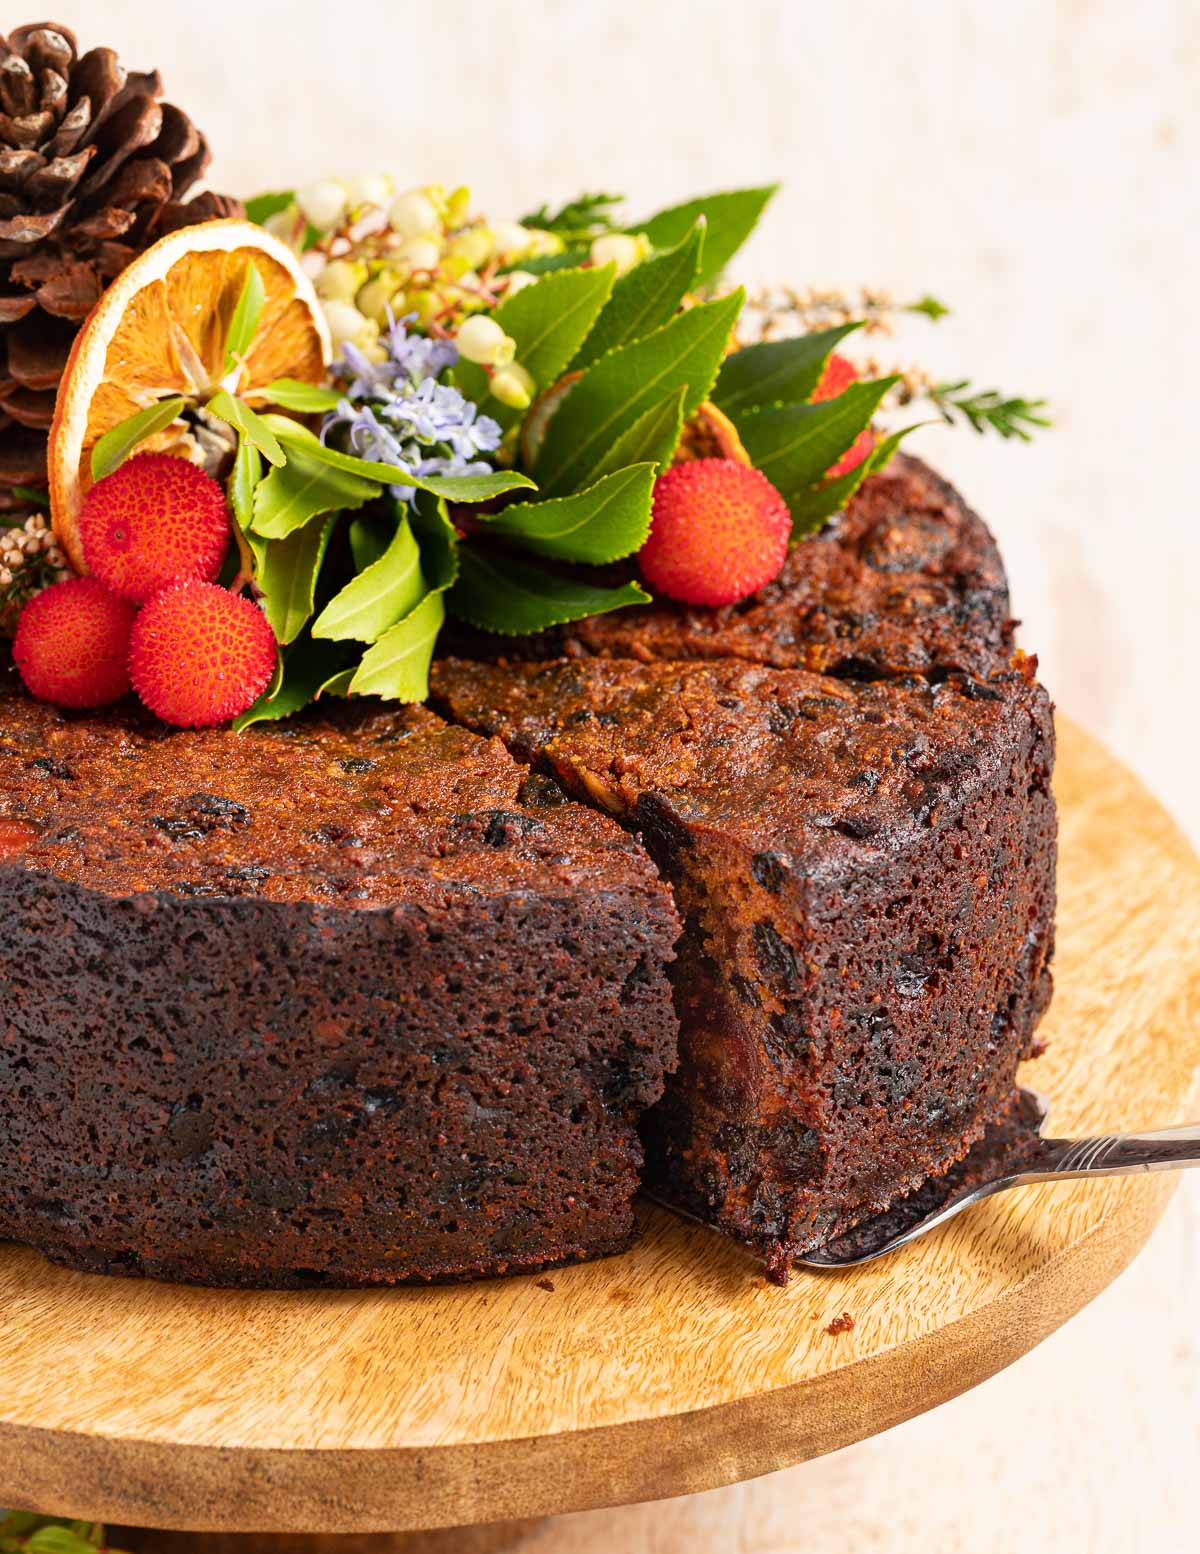 The ultimate Vegan Christmas Cake! This classic rich, dark vegan fruit cake is jam-packed with dried fruit and booze (although still delicious made alcohol-free) and can be made the day before, or up to 1 year ahead. Keep the decorations simple and rustic, or cover it in marzipan and fondant icing. Perfect for enjoying at Christmas but also makes a fantastic vegan wedding cake!